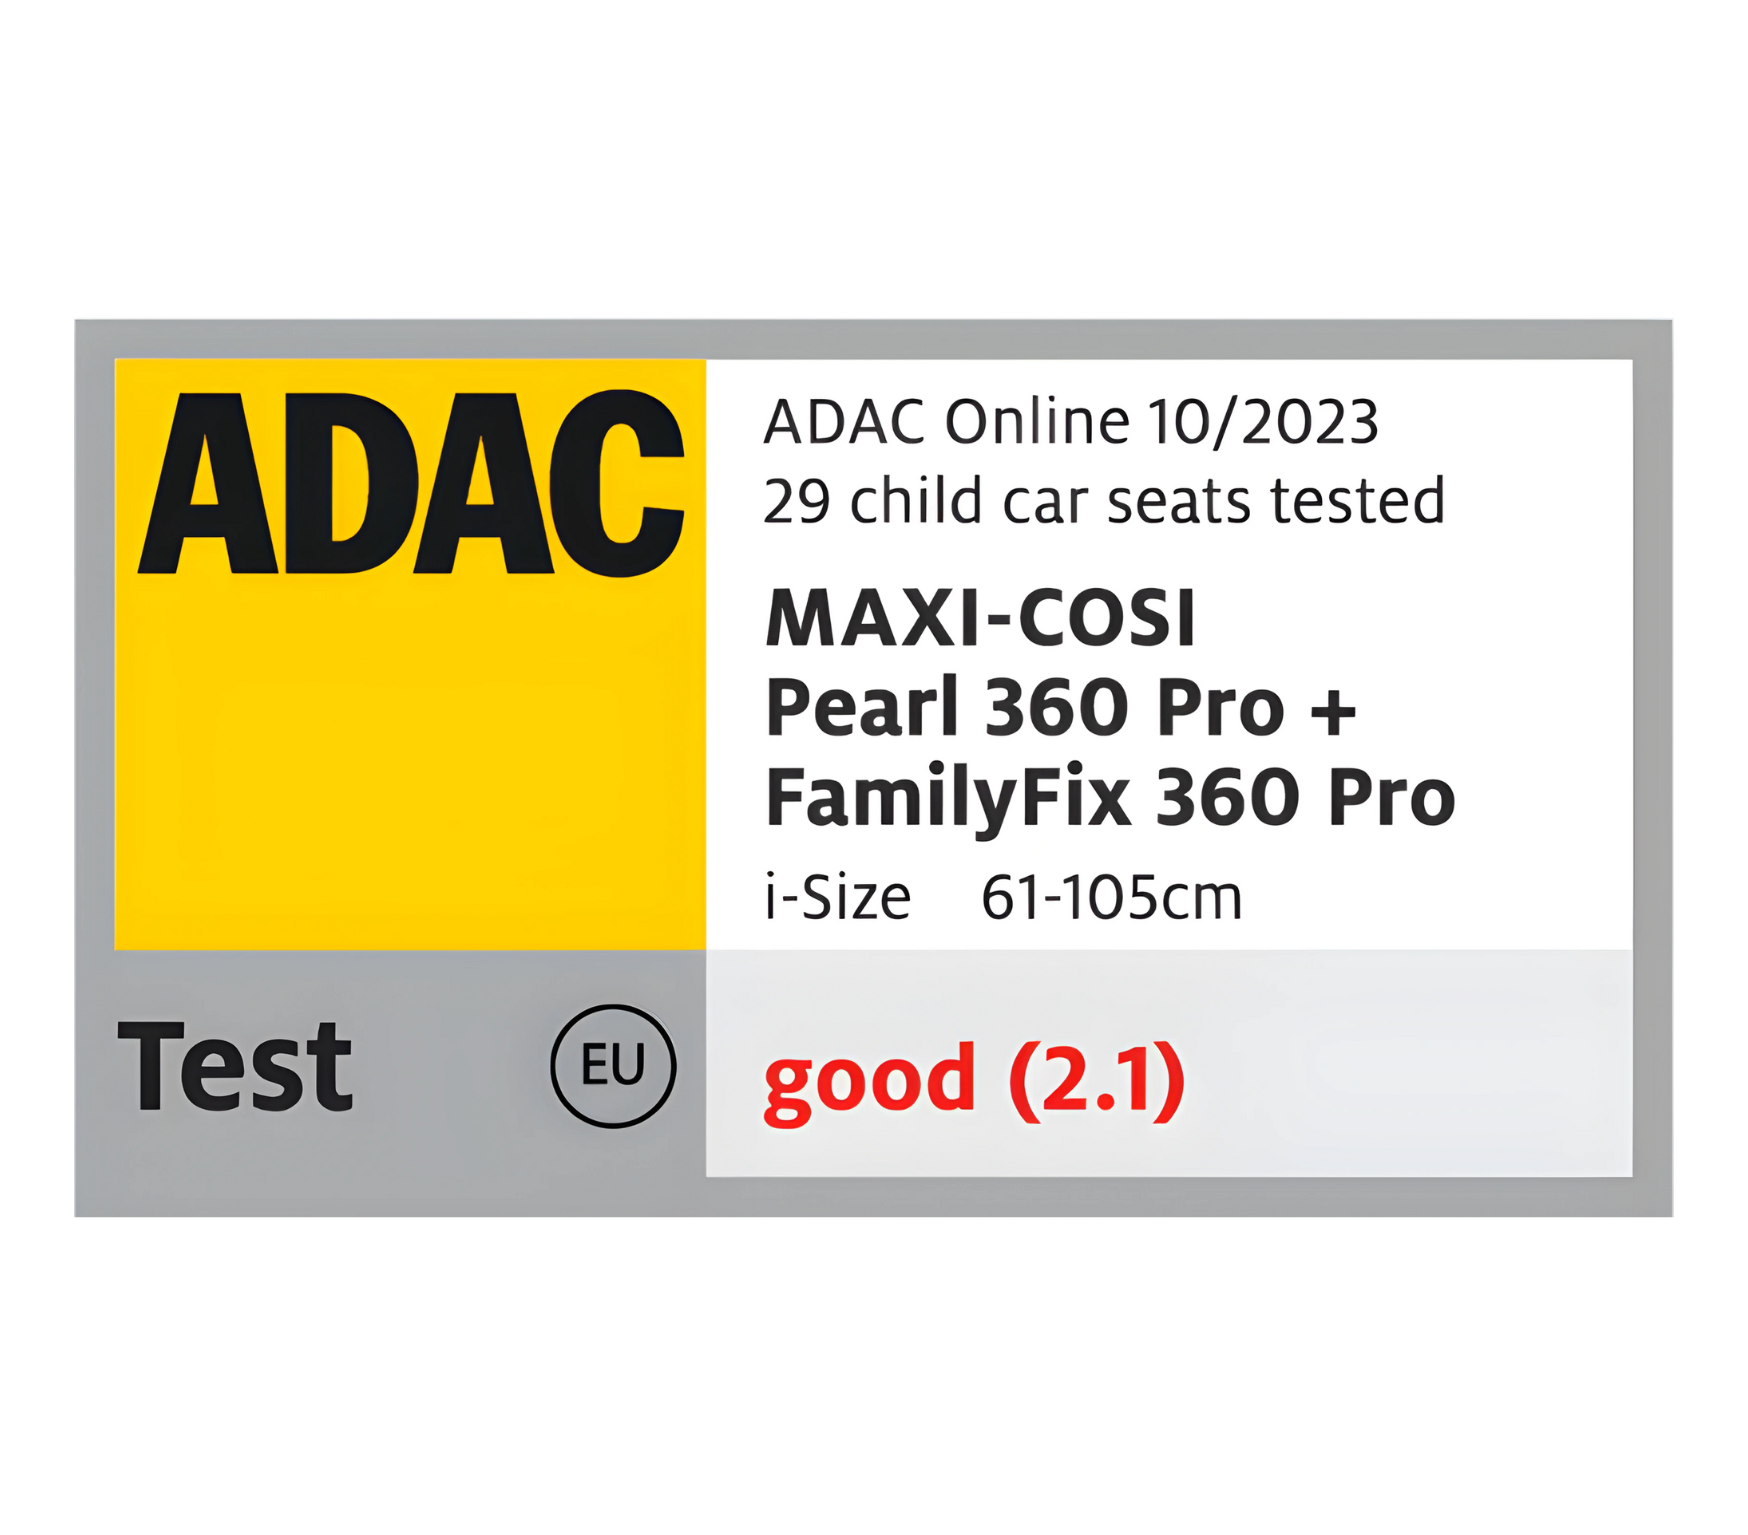 ADAC Safety Certificate for Maxi-Cosi Pearl 360 Pro